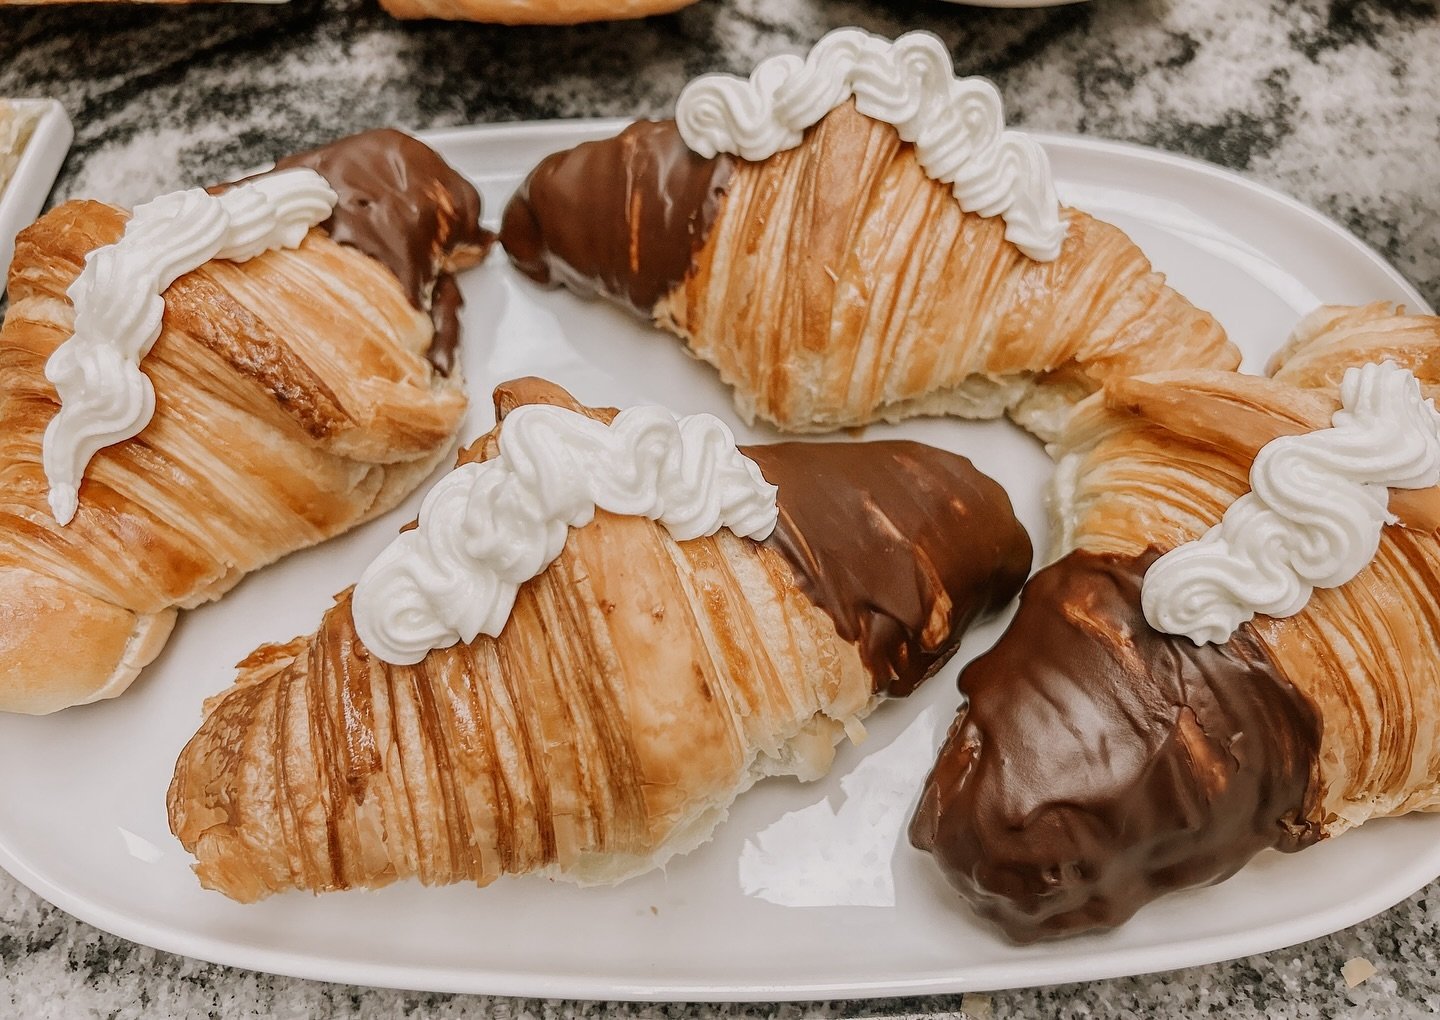 Come pick up a Banoffee croissant !! Dulce de leche and banana with chocolate and cream !! A new take on a traditional British pie. We&rsquo;ll be here from 10-2 and can&rsquo;t wait to see you !! 

*or until sold out*